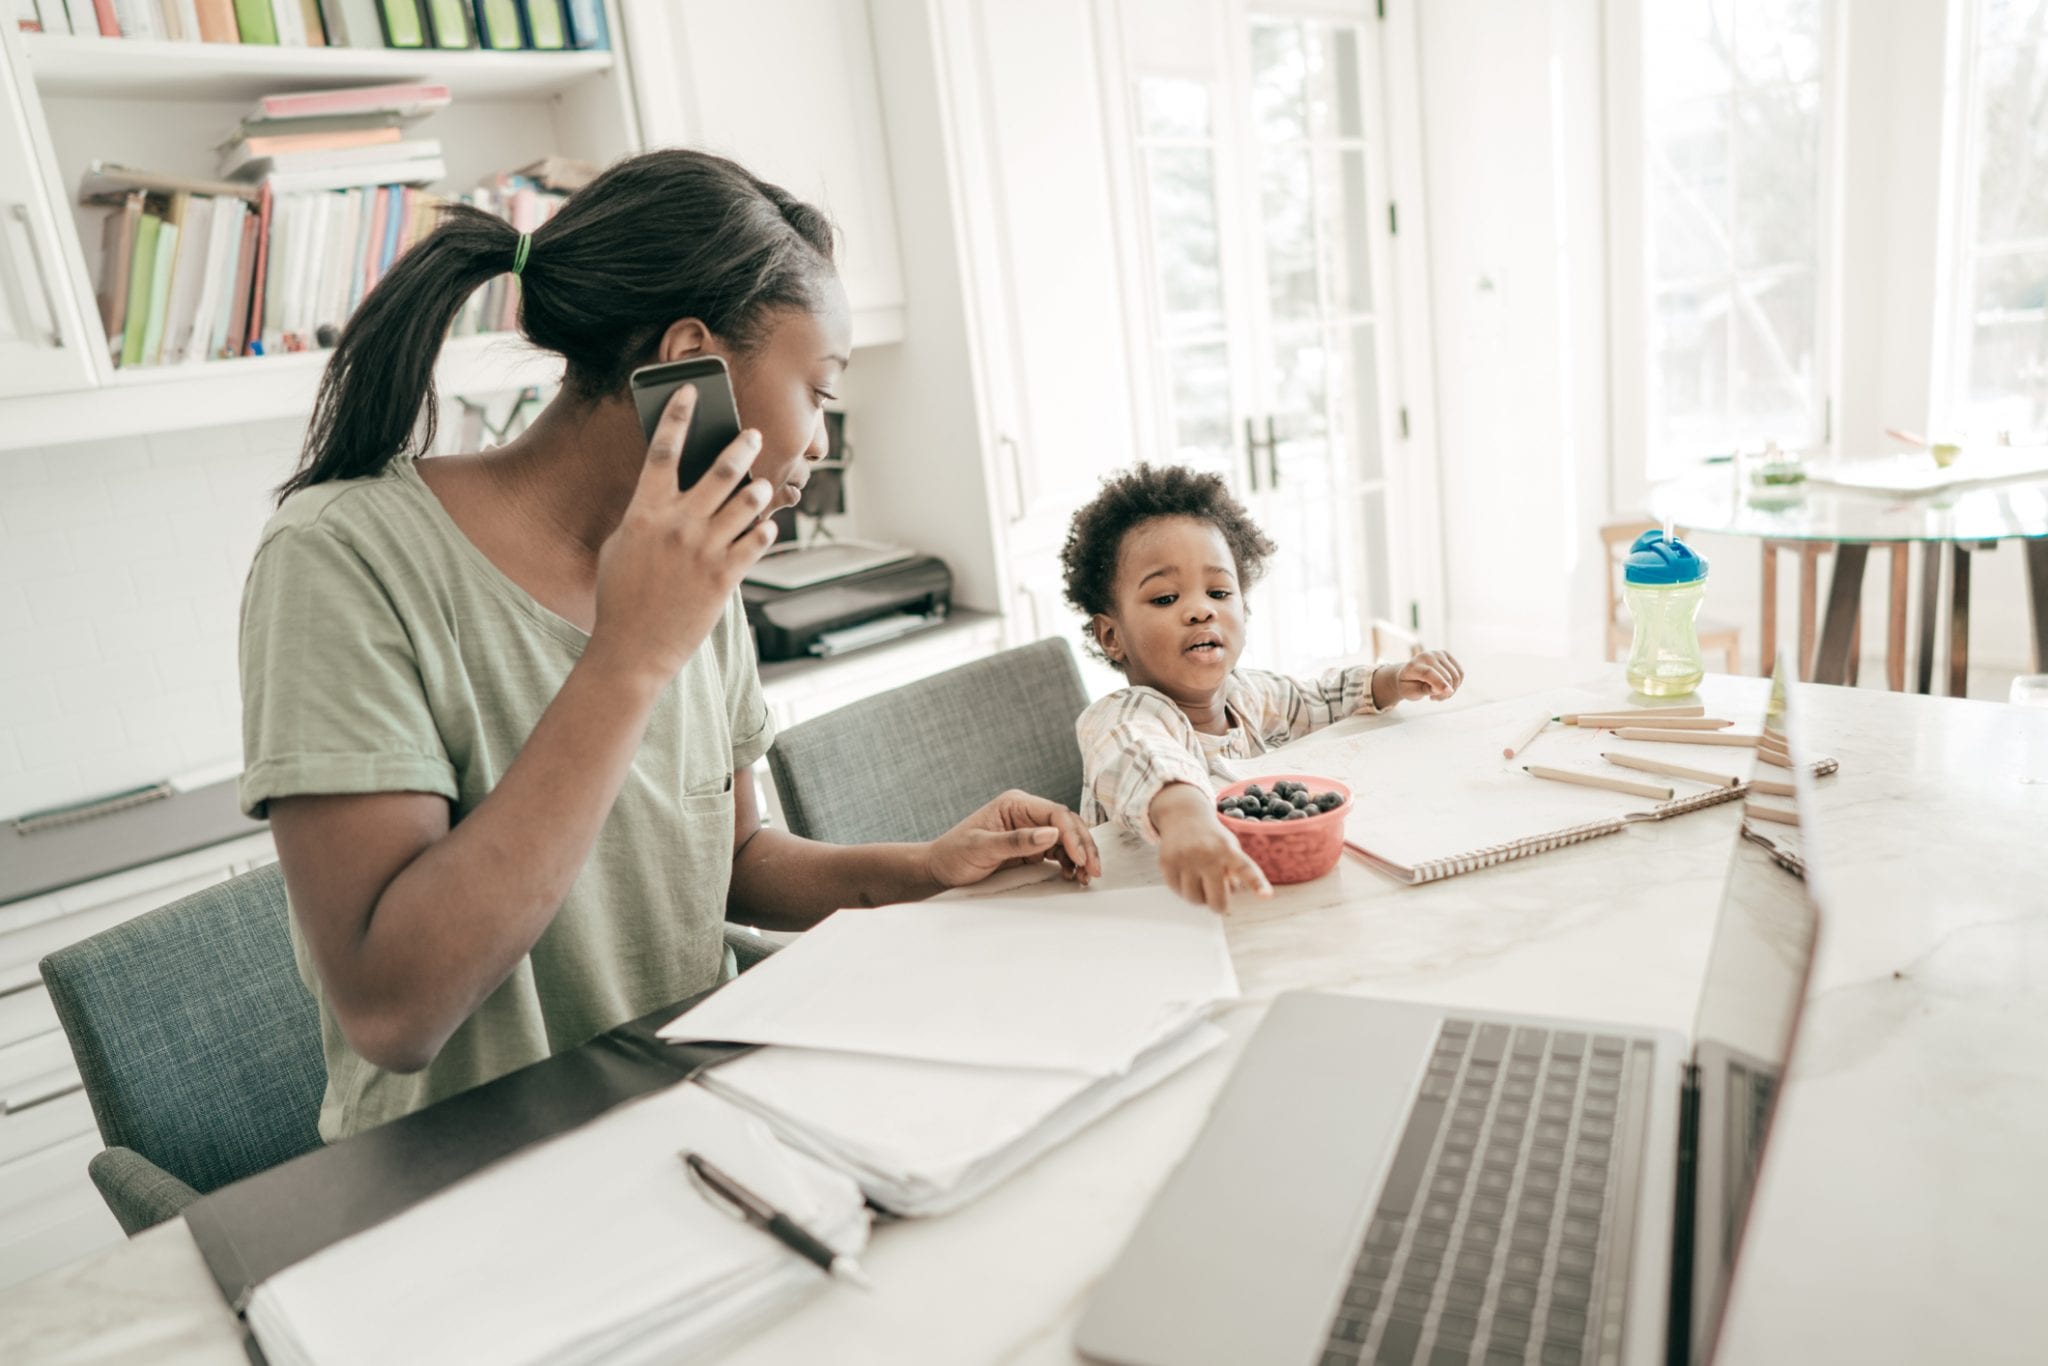 Maintaining a routine schedule is key to making working from home with a baby work.